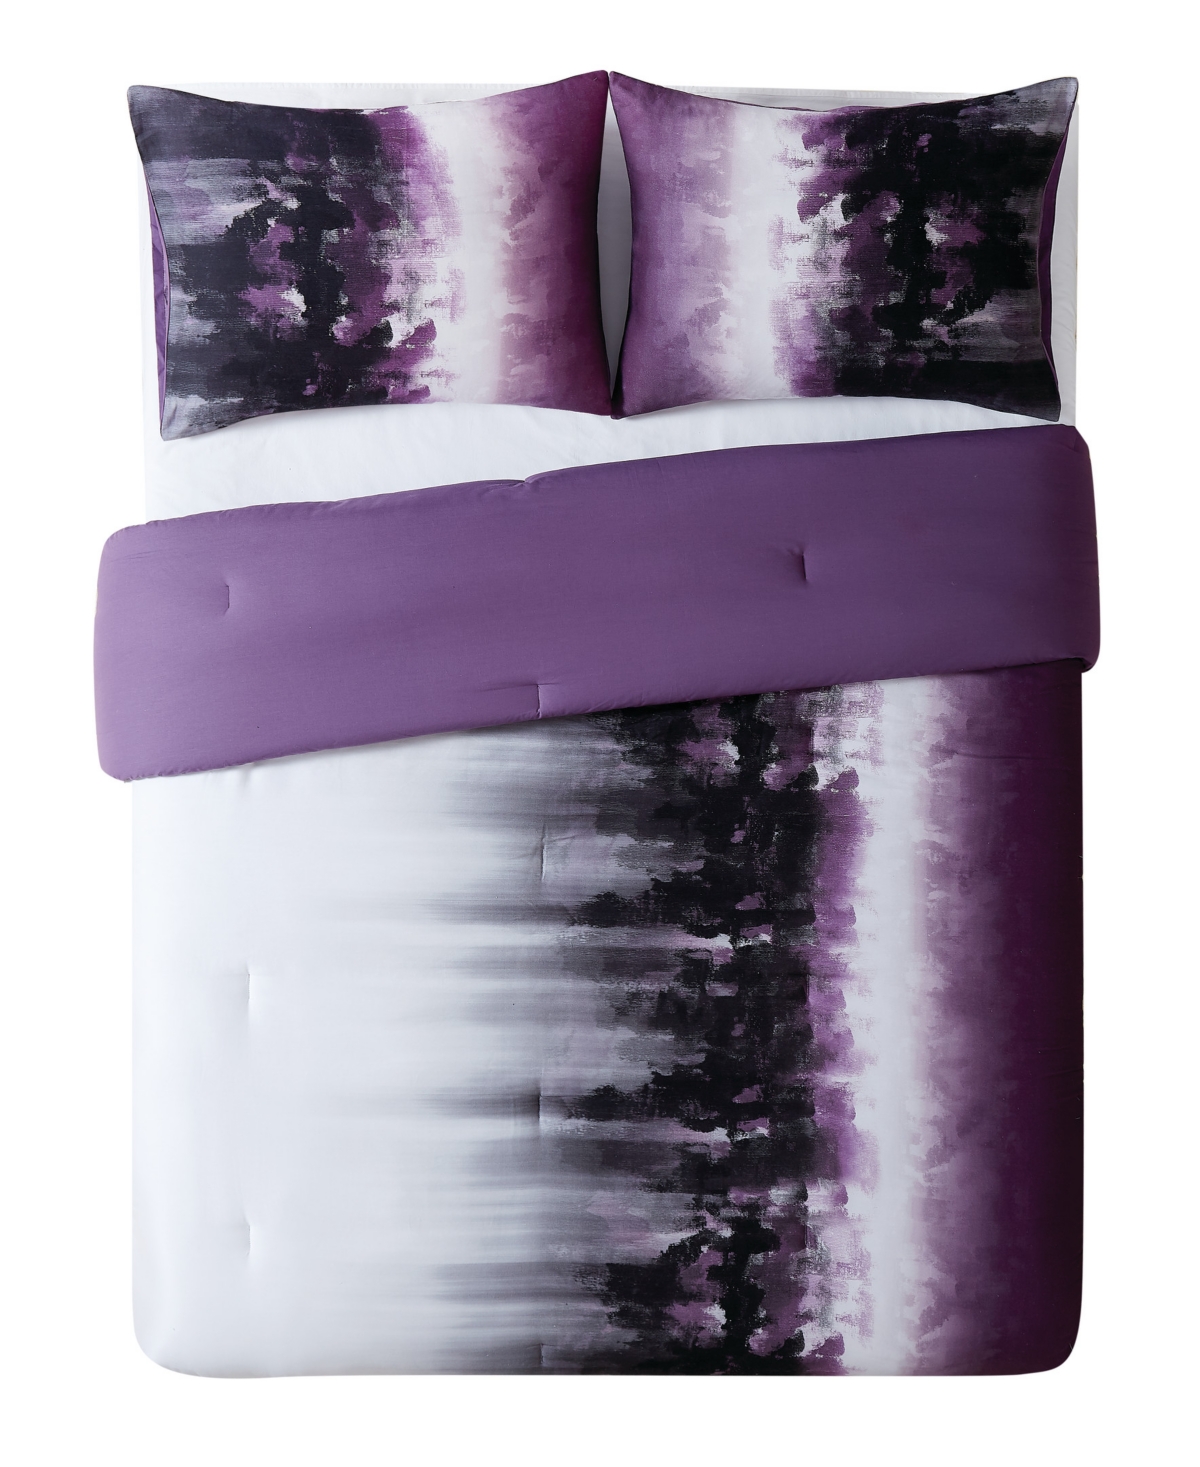 Shop Vince Camuto Home Vince Camuto Mirrea King Comforter Set In White,purple